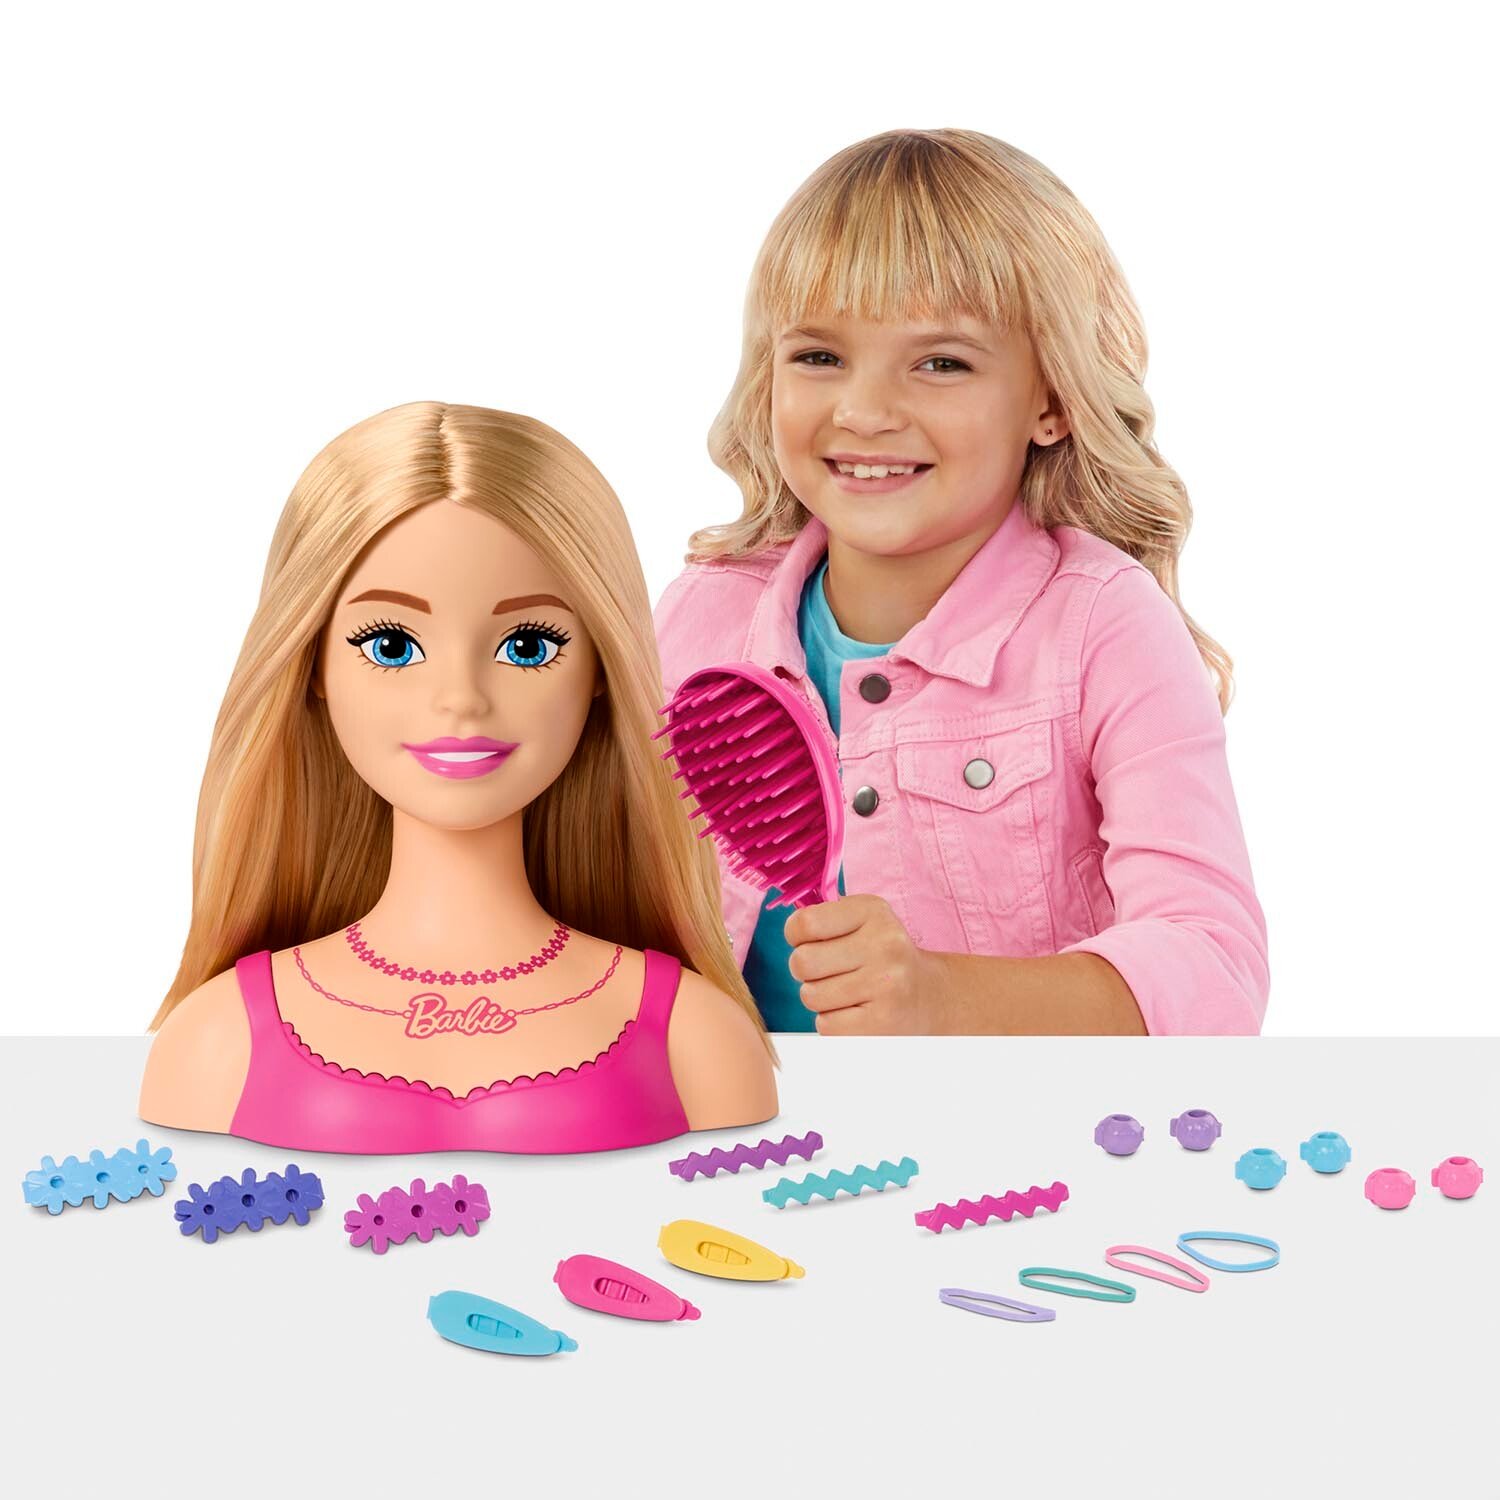 Barbie Styling Head and Accessories - Pink Image 10